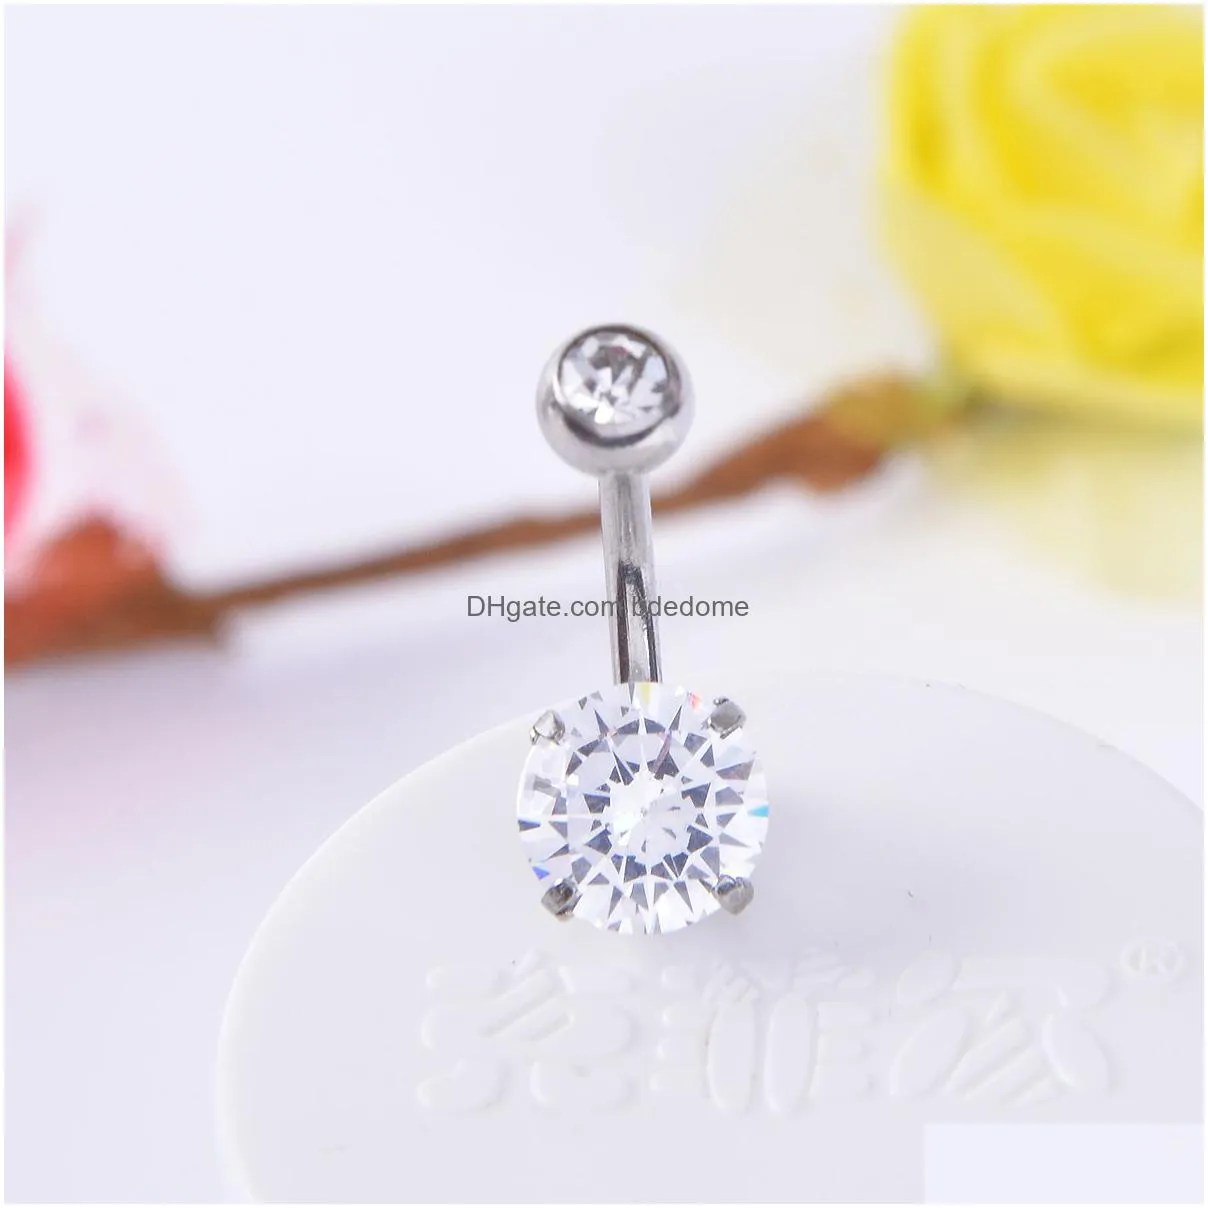 cute zircon crystal body jewelry stainless steel rhinestone navel bell button piercing rings for women gift black color